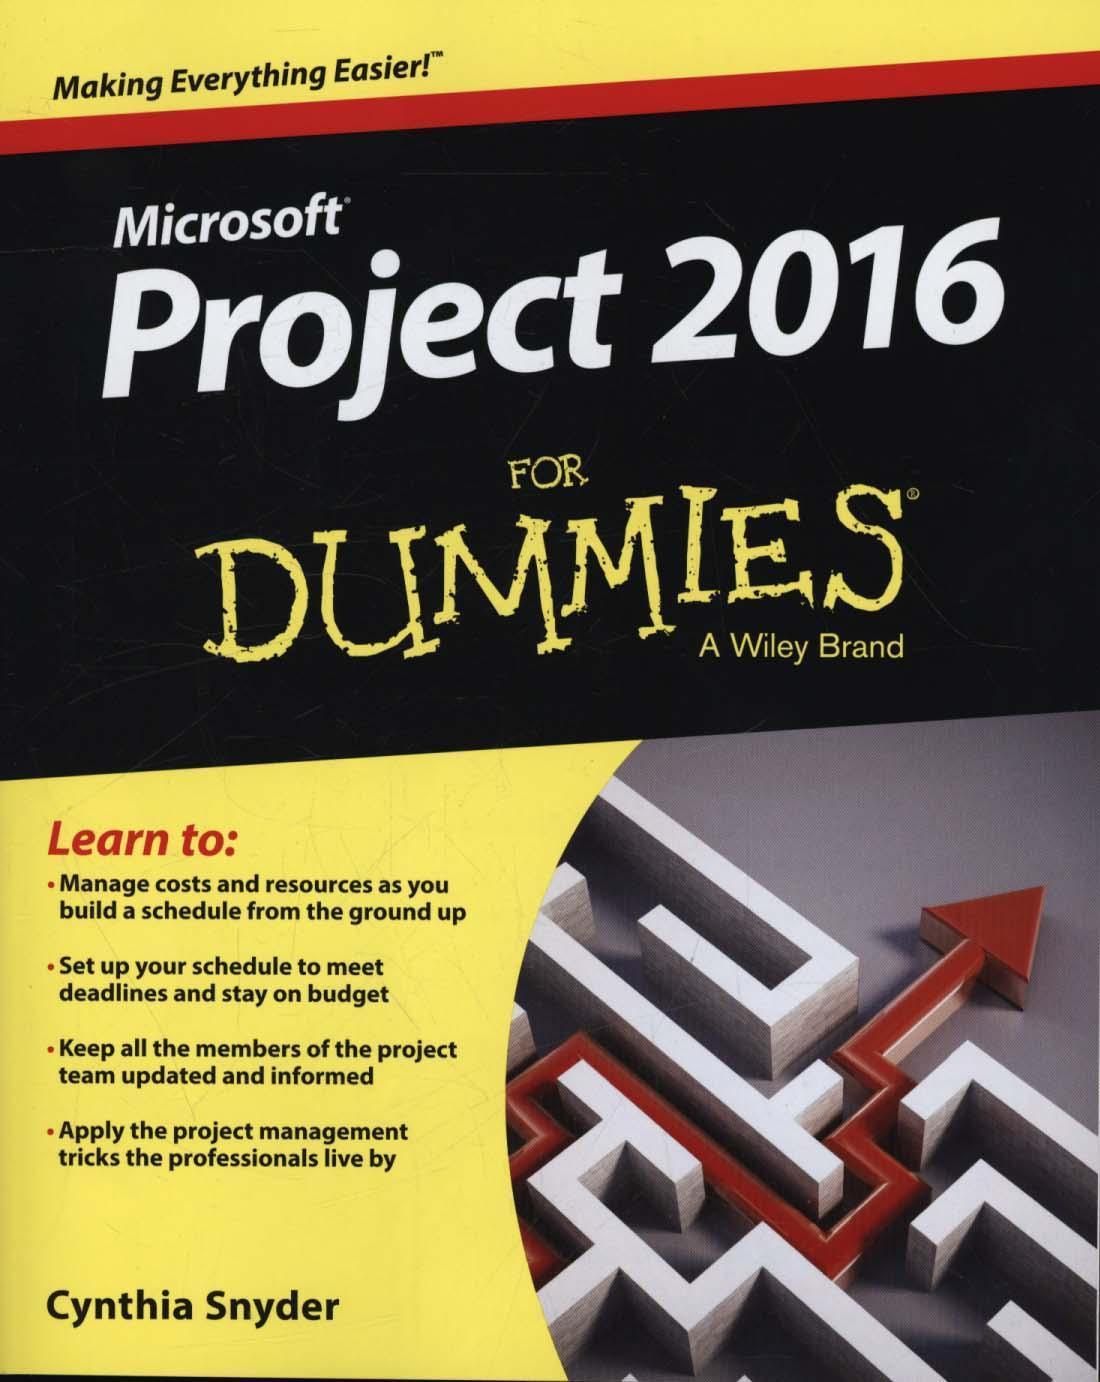 Project 2016 for Dummies